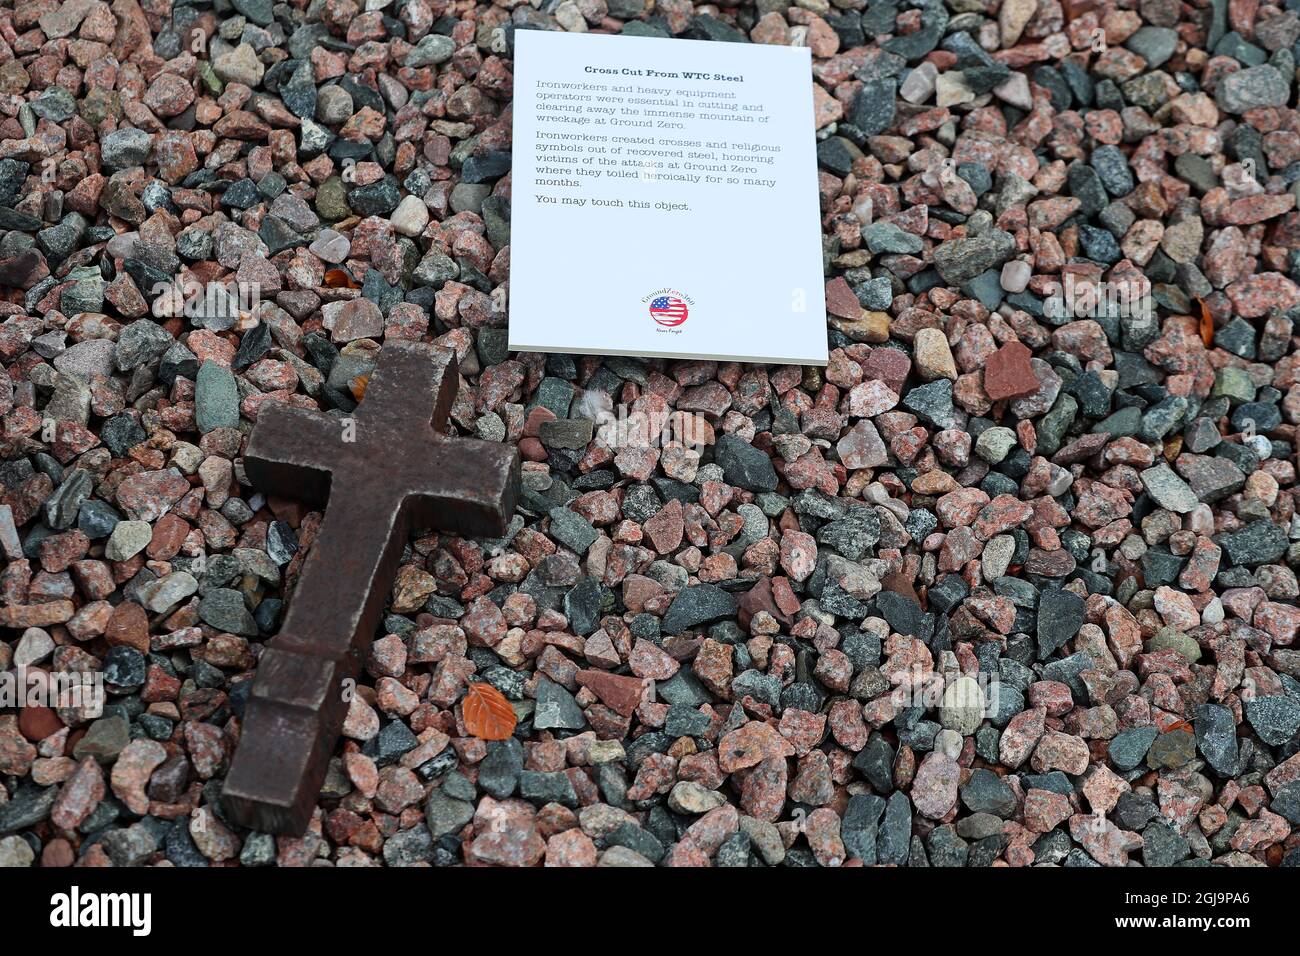 A cross cut from steel that was part of the World Trade Centre forms part of a 9/11 memorial at the US Ambassador's Residence in Dublin, during a 20th anniversary event to commemorate the lives lost during the 9/11 attacks. Picture date: Wednesday August 25, 2021. Stock Photo